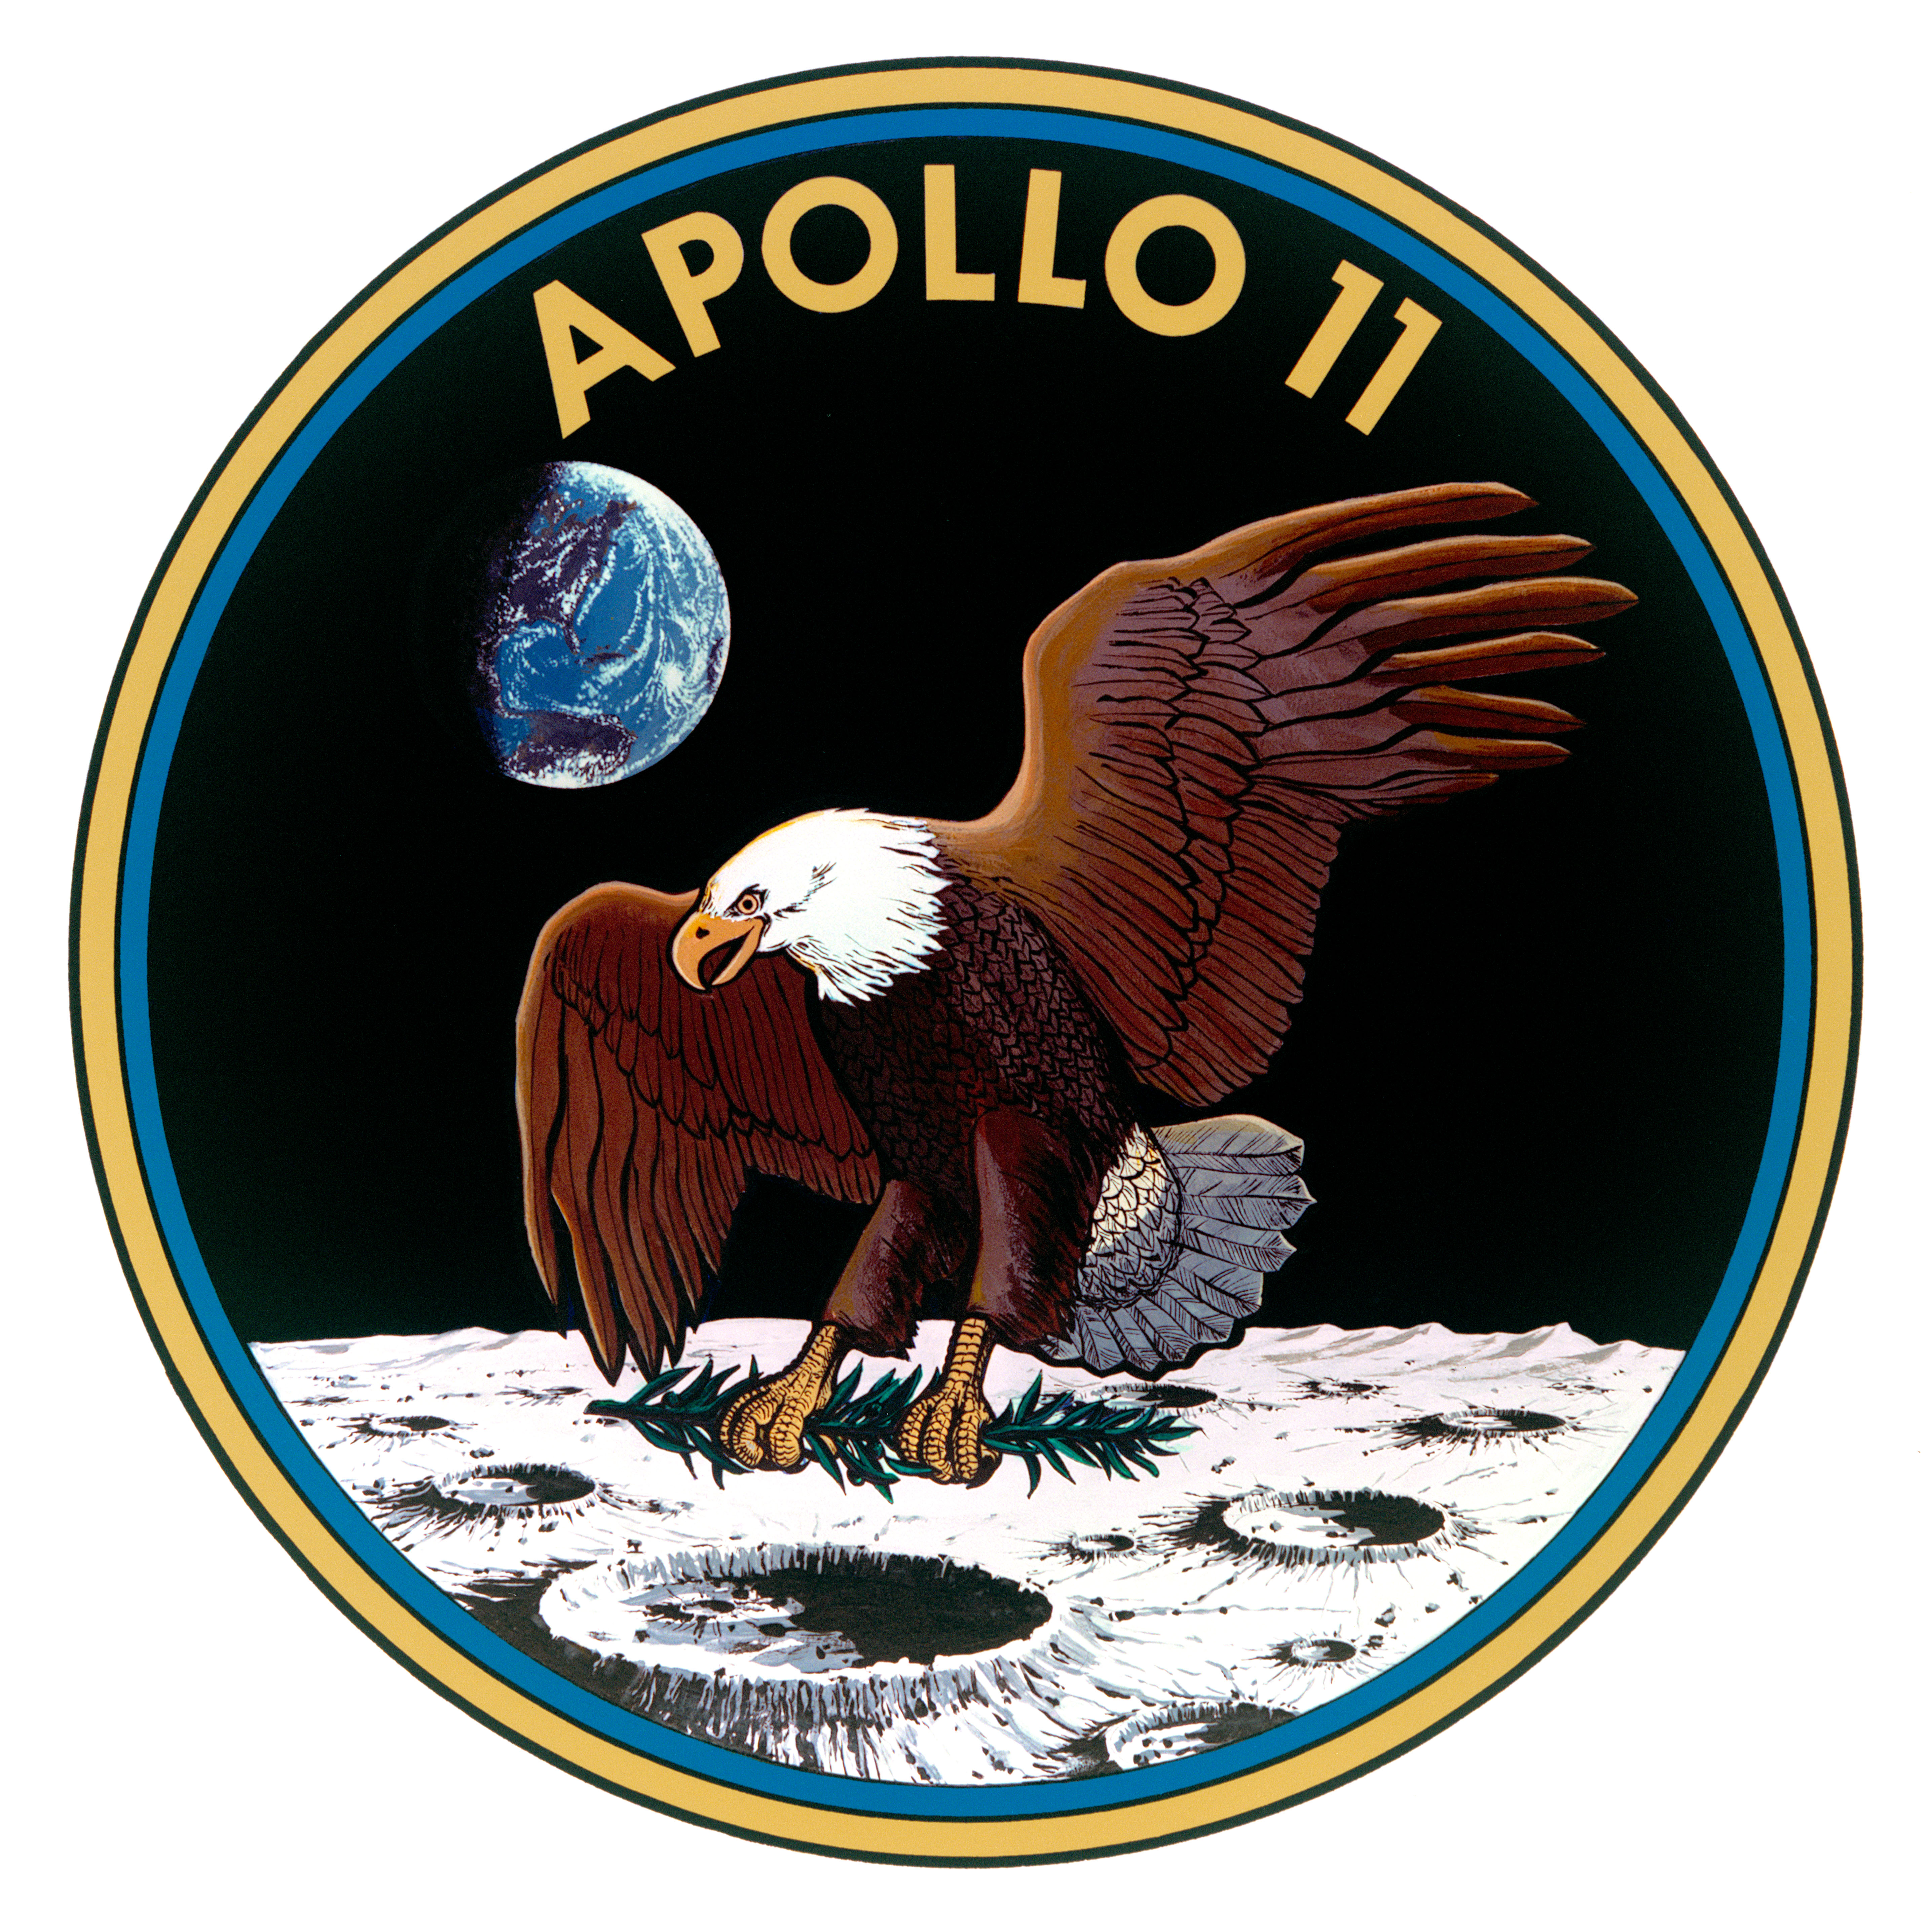 NASA/SPACE SHUTTLE/APOLLO Embroidered 3 Emblem Patch ALL ONE PIECE 